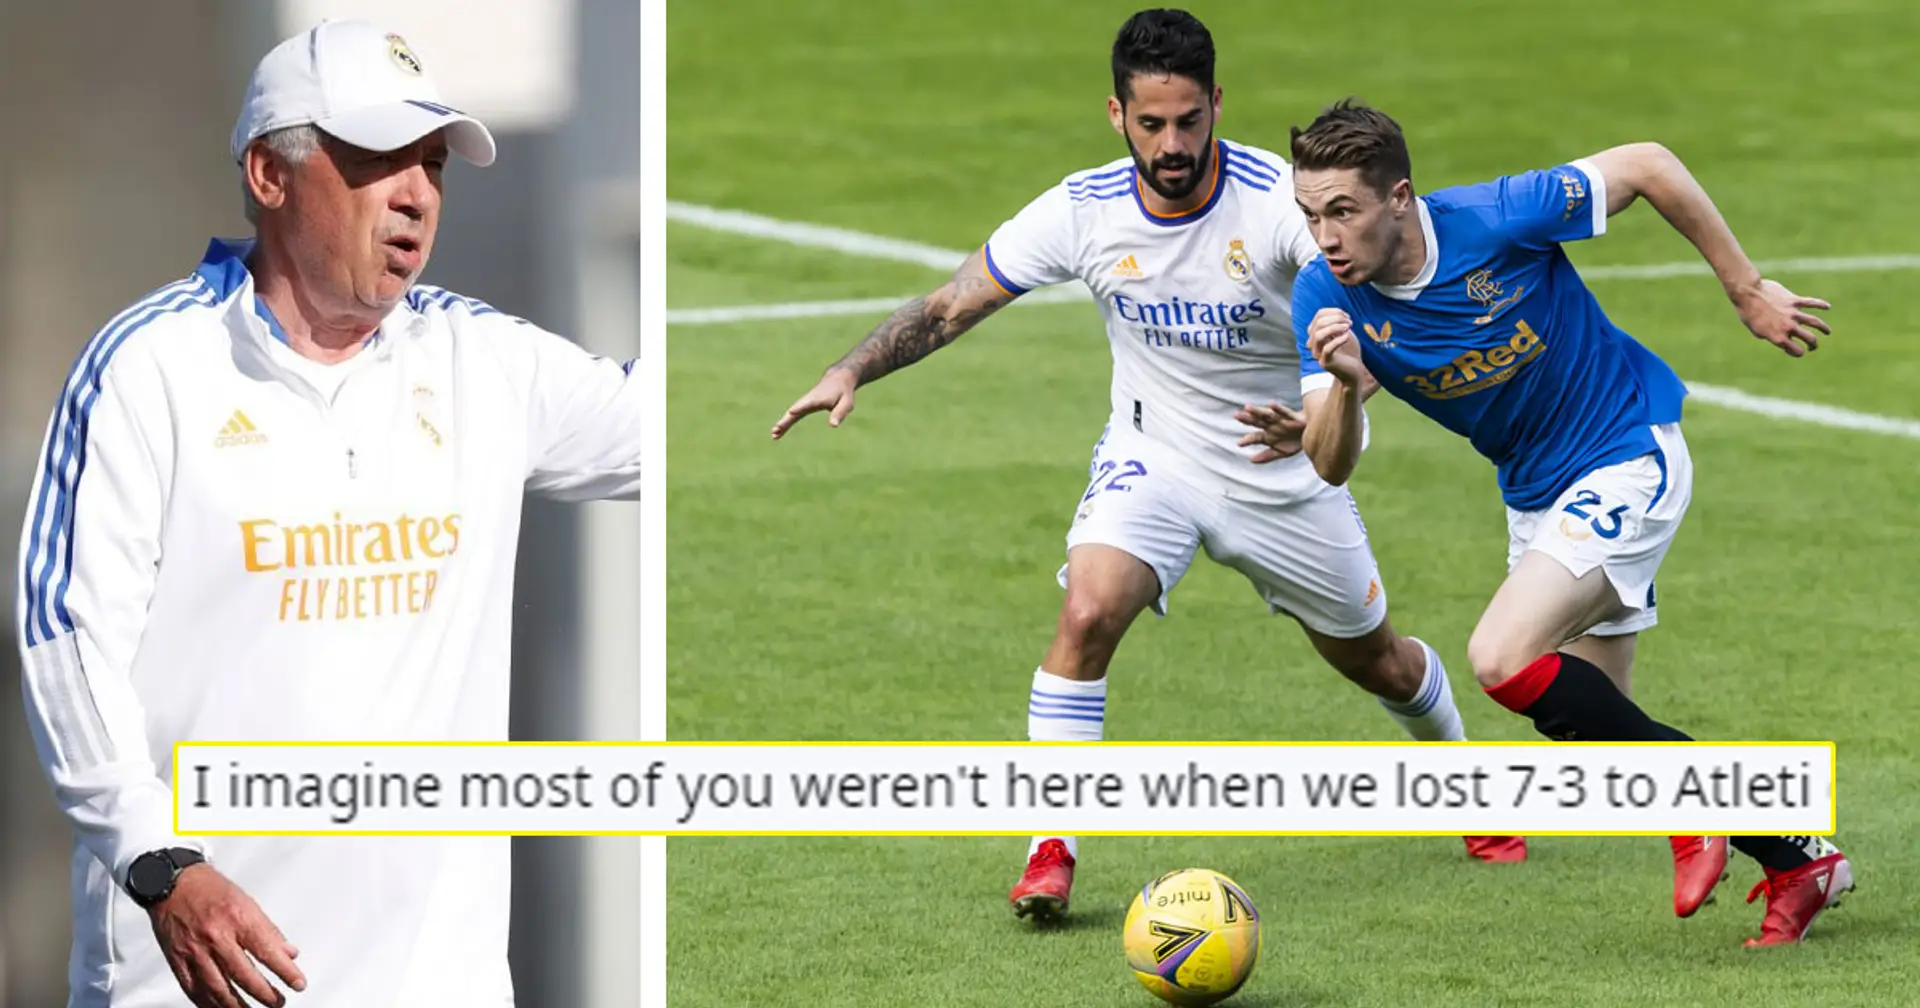 'As if we're doomed for the season': fan lists 3 reasons why Madridistas shouldn't worry about Rangers loss